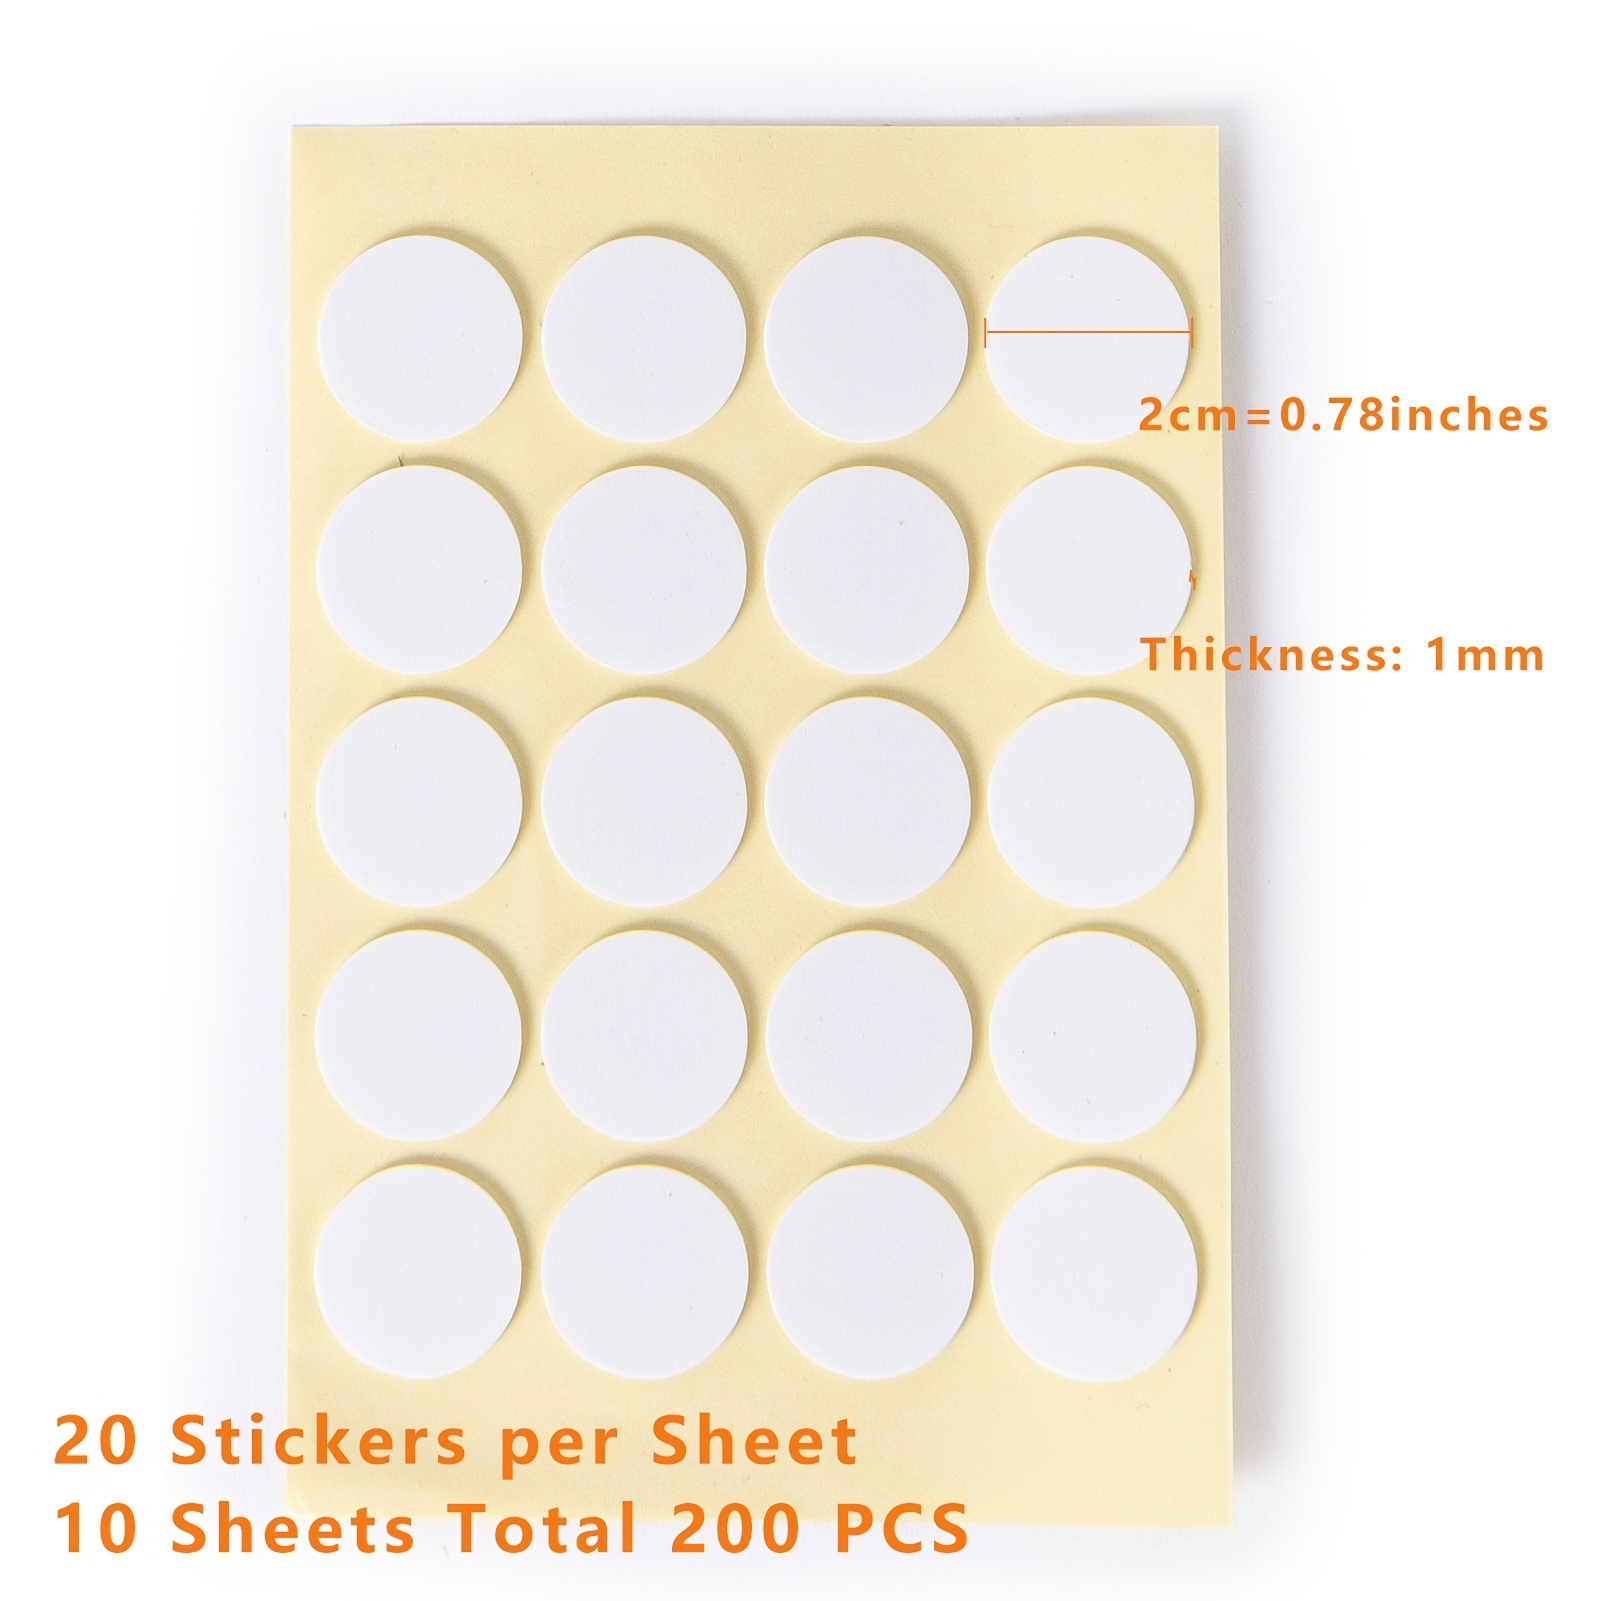 10 Sheets Candle Wick Stickers DIY Candle Making Sticker Double